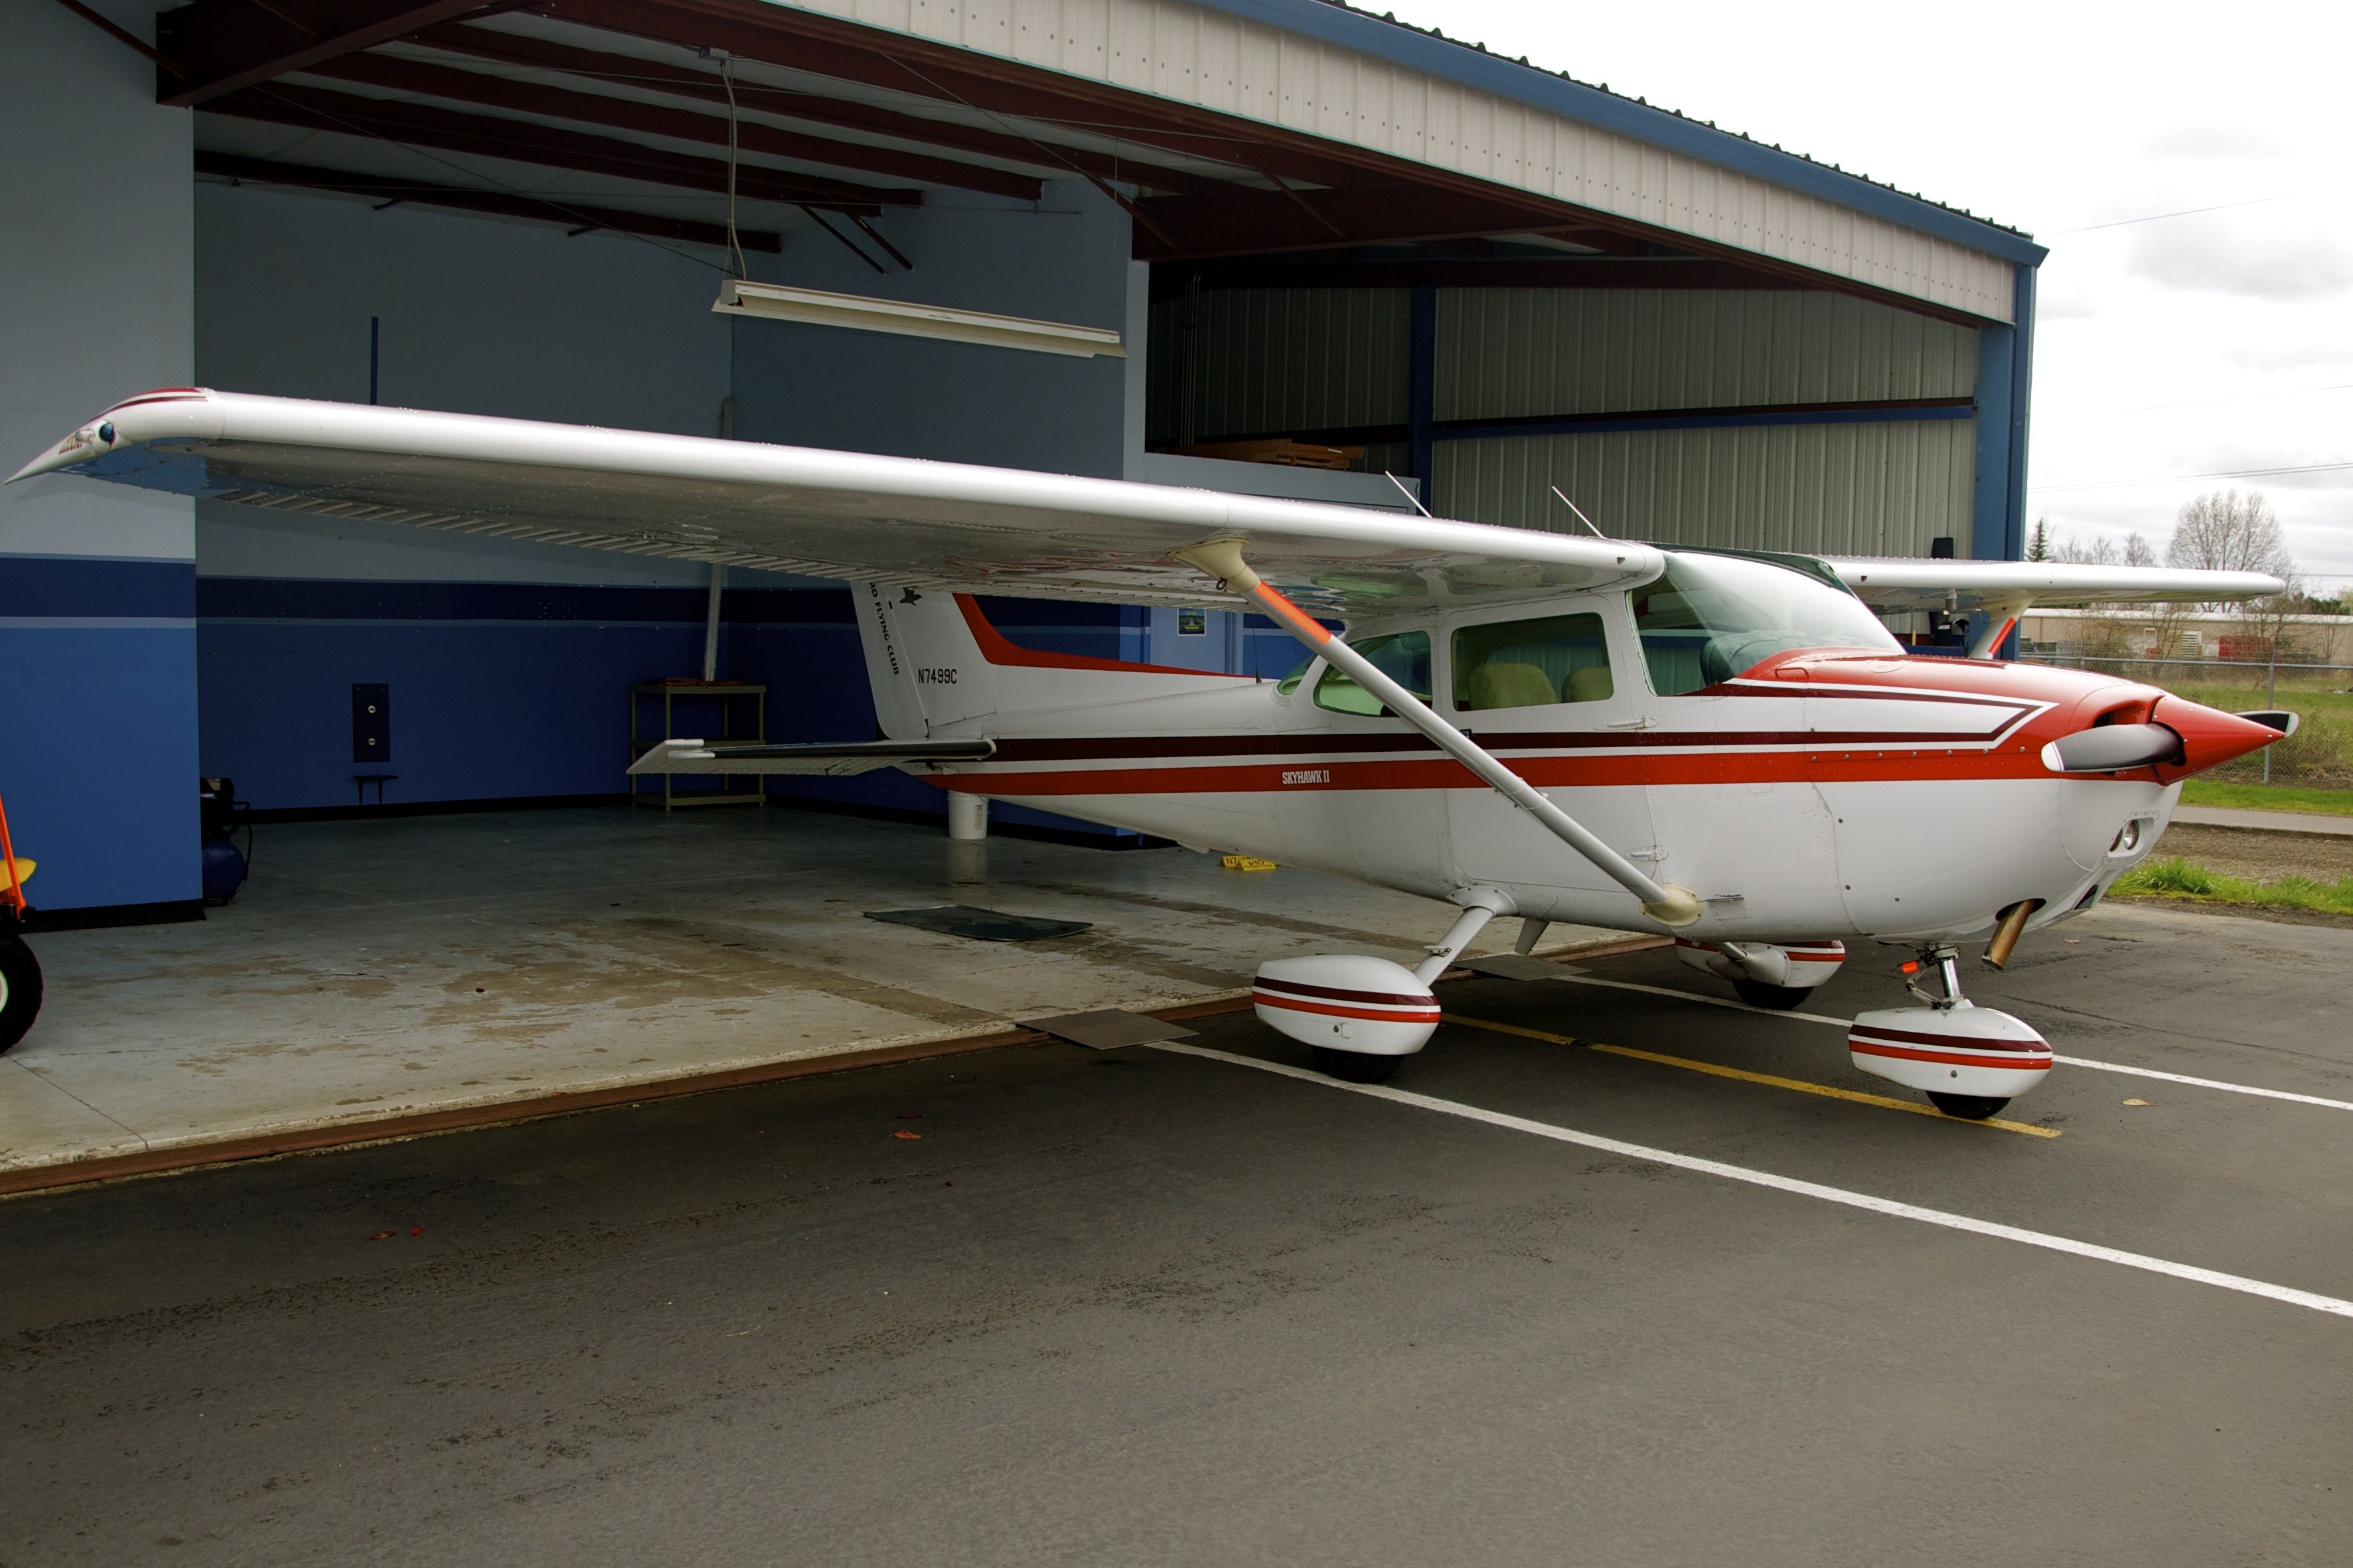 The Club's 172 "99C" awaits fuel on 2011 April 3.